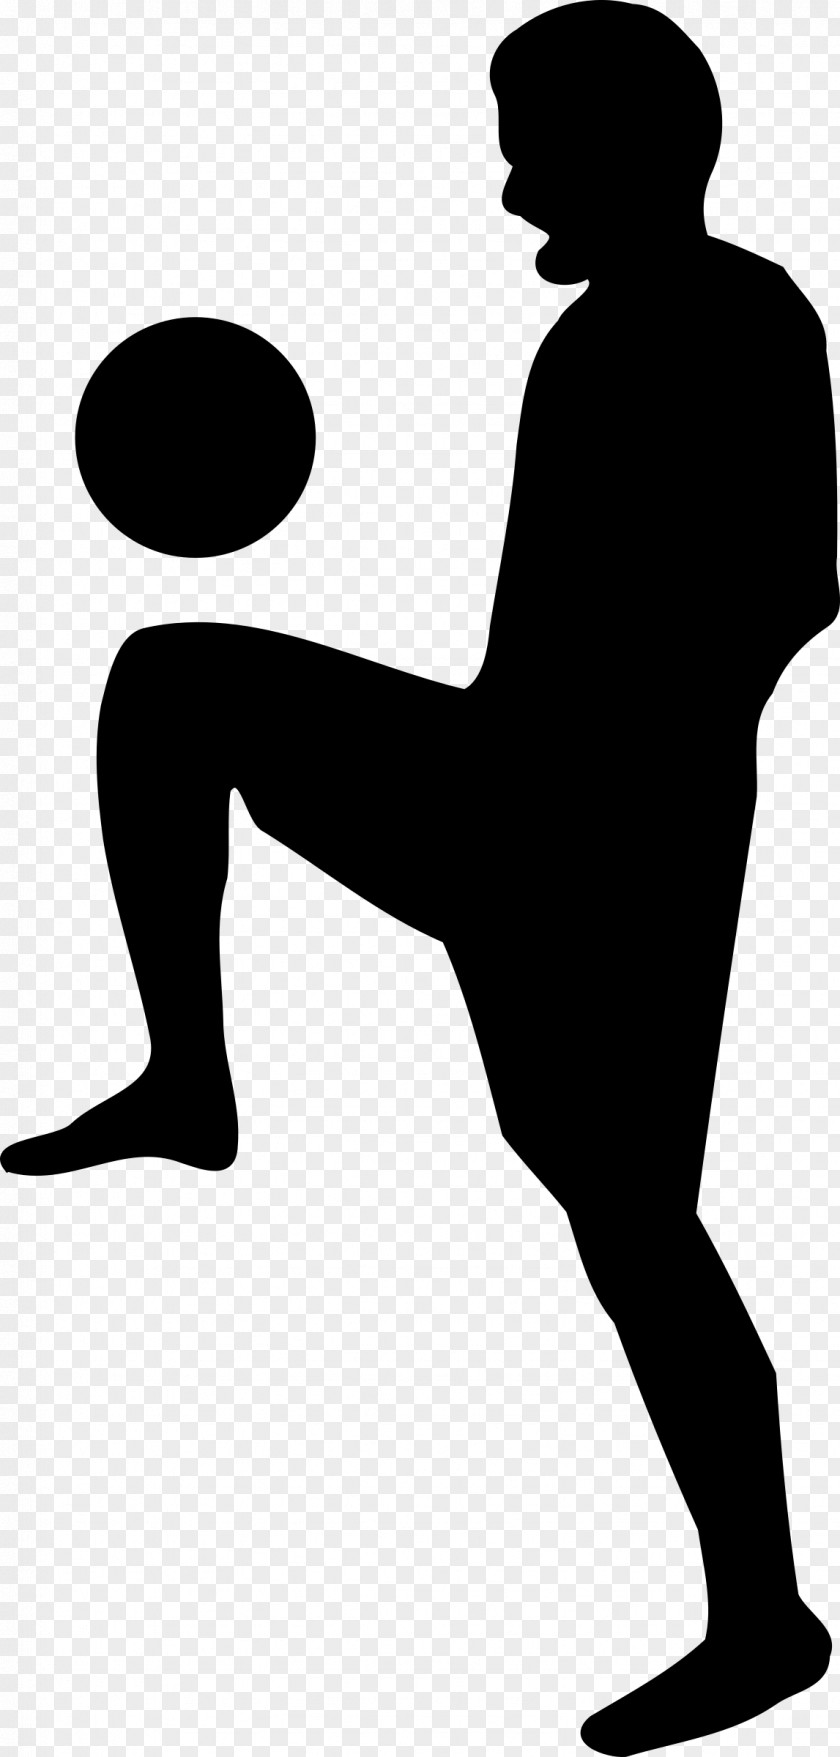 Playing Soccer Silhouette Figures Material Football Clip Art PNG